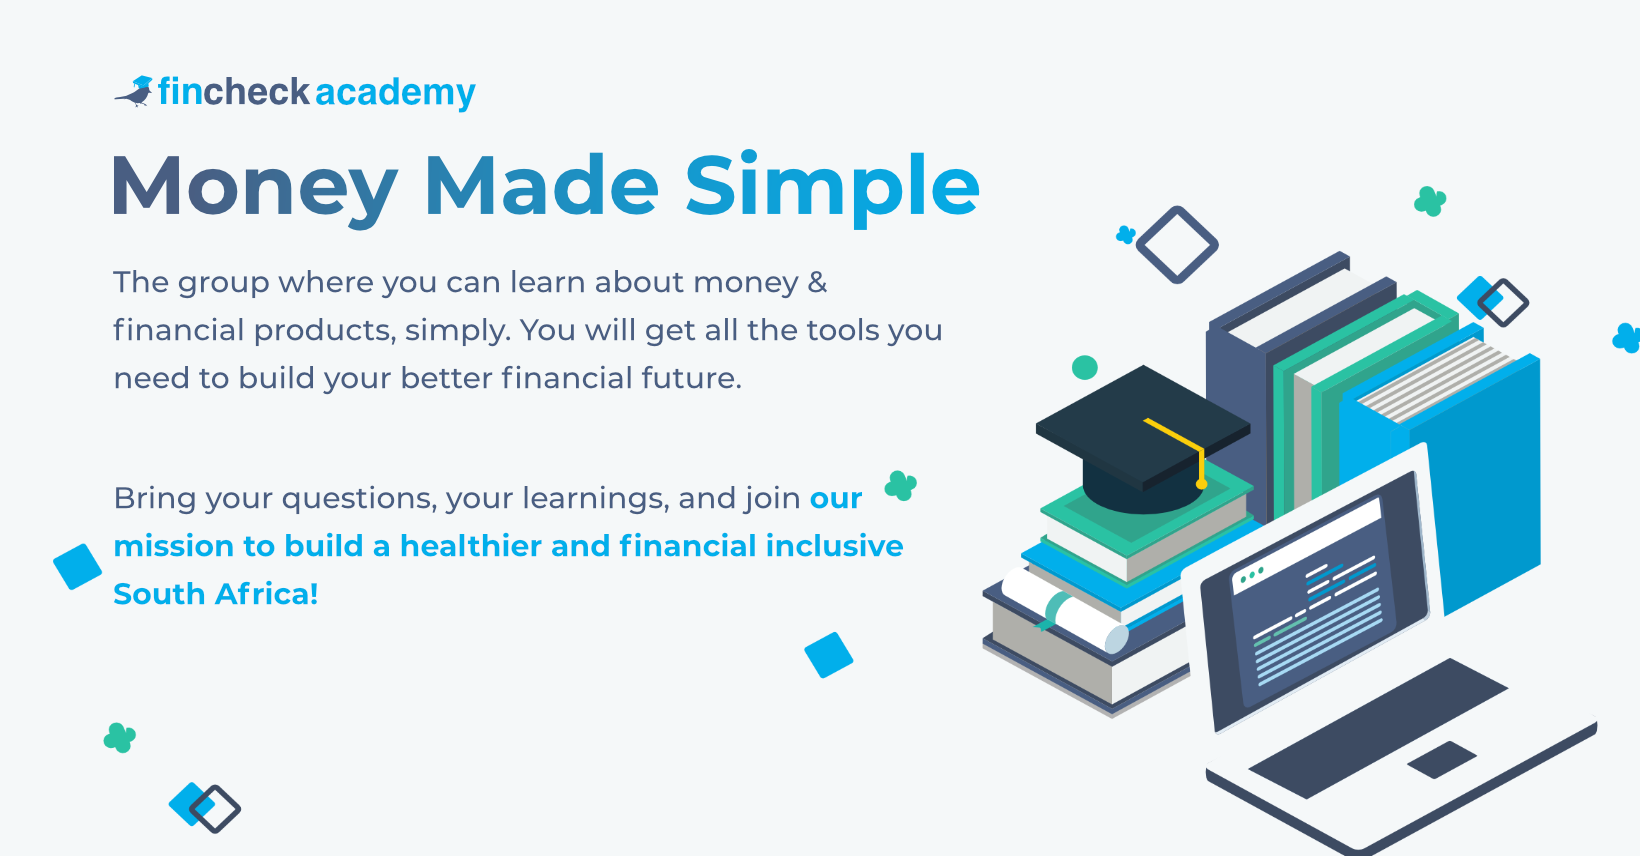 Money Made Simple - Fincheck Academy